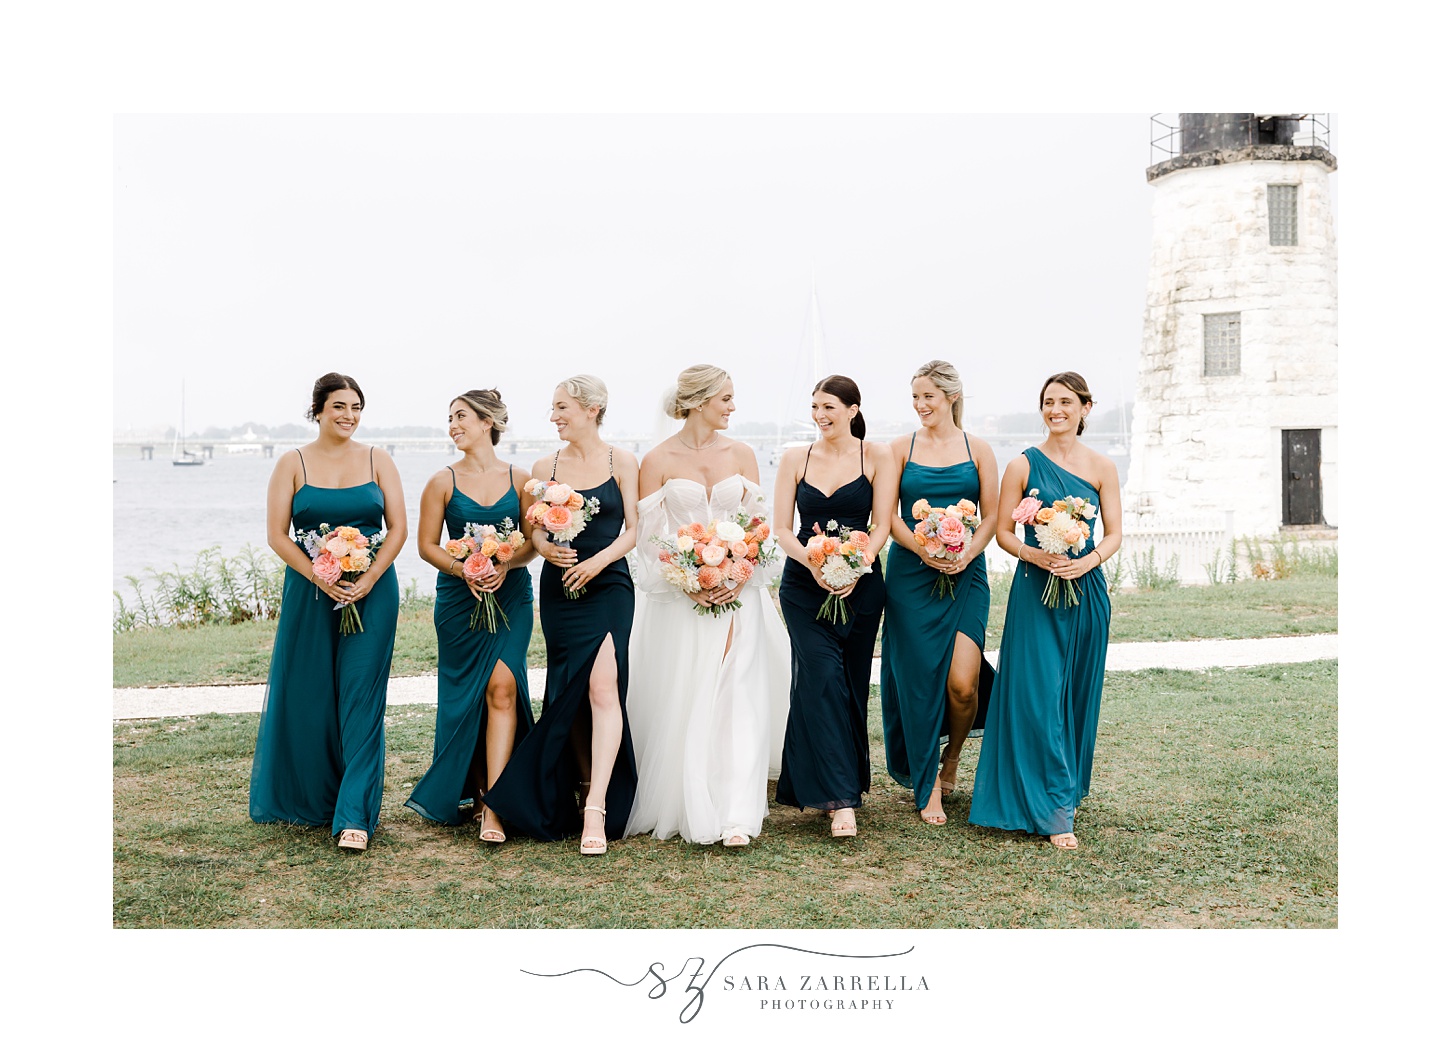 bride and bridesmaids in teal gowns walk across lawn in front of Narragansett Bay